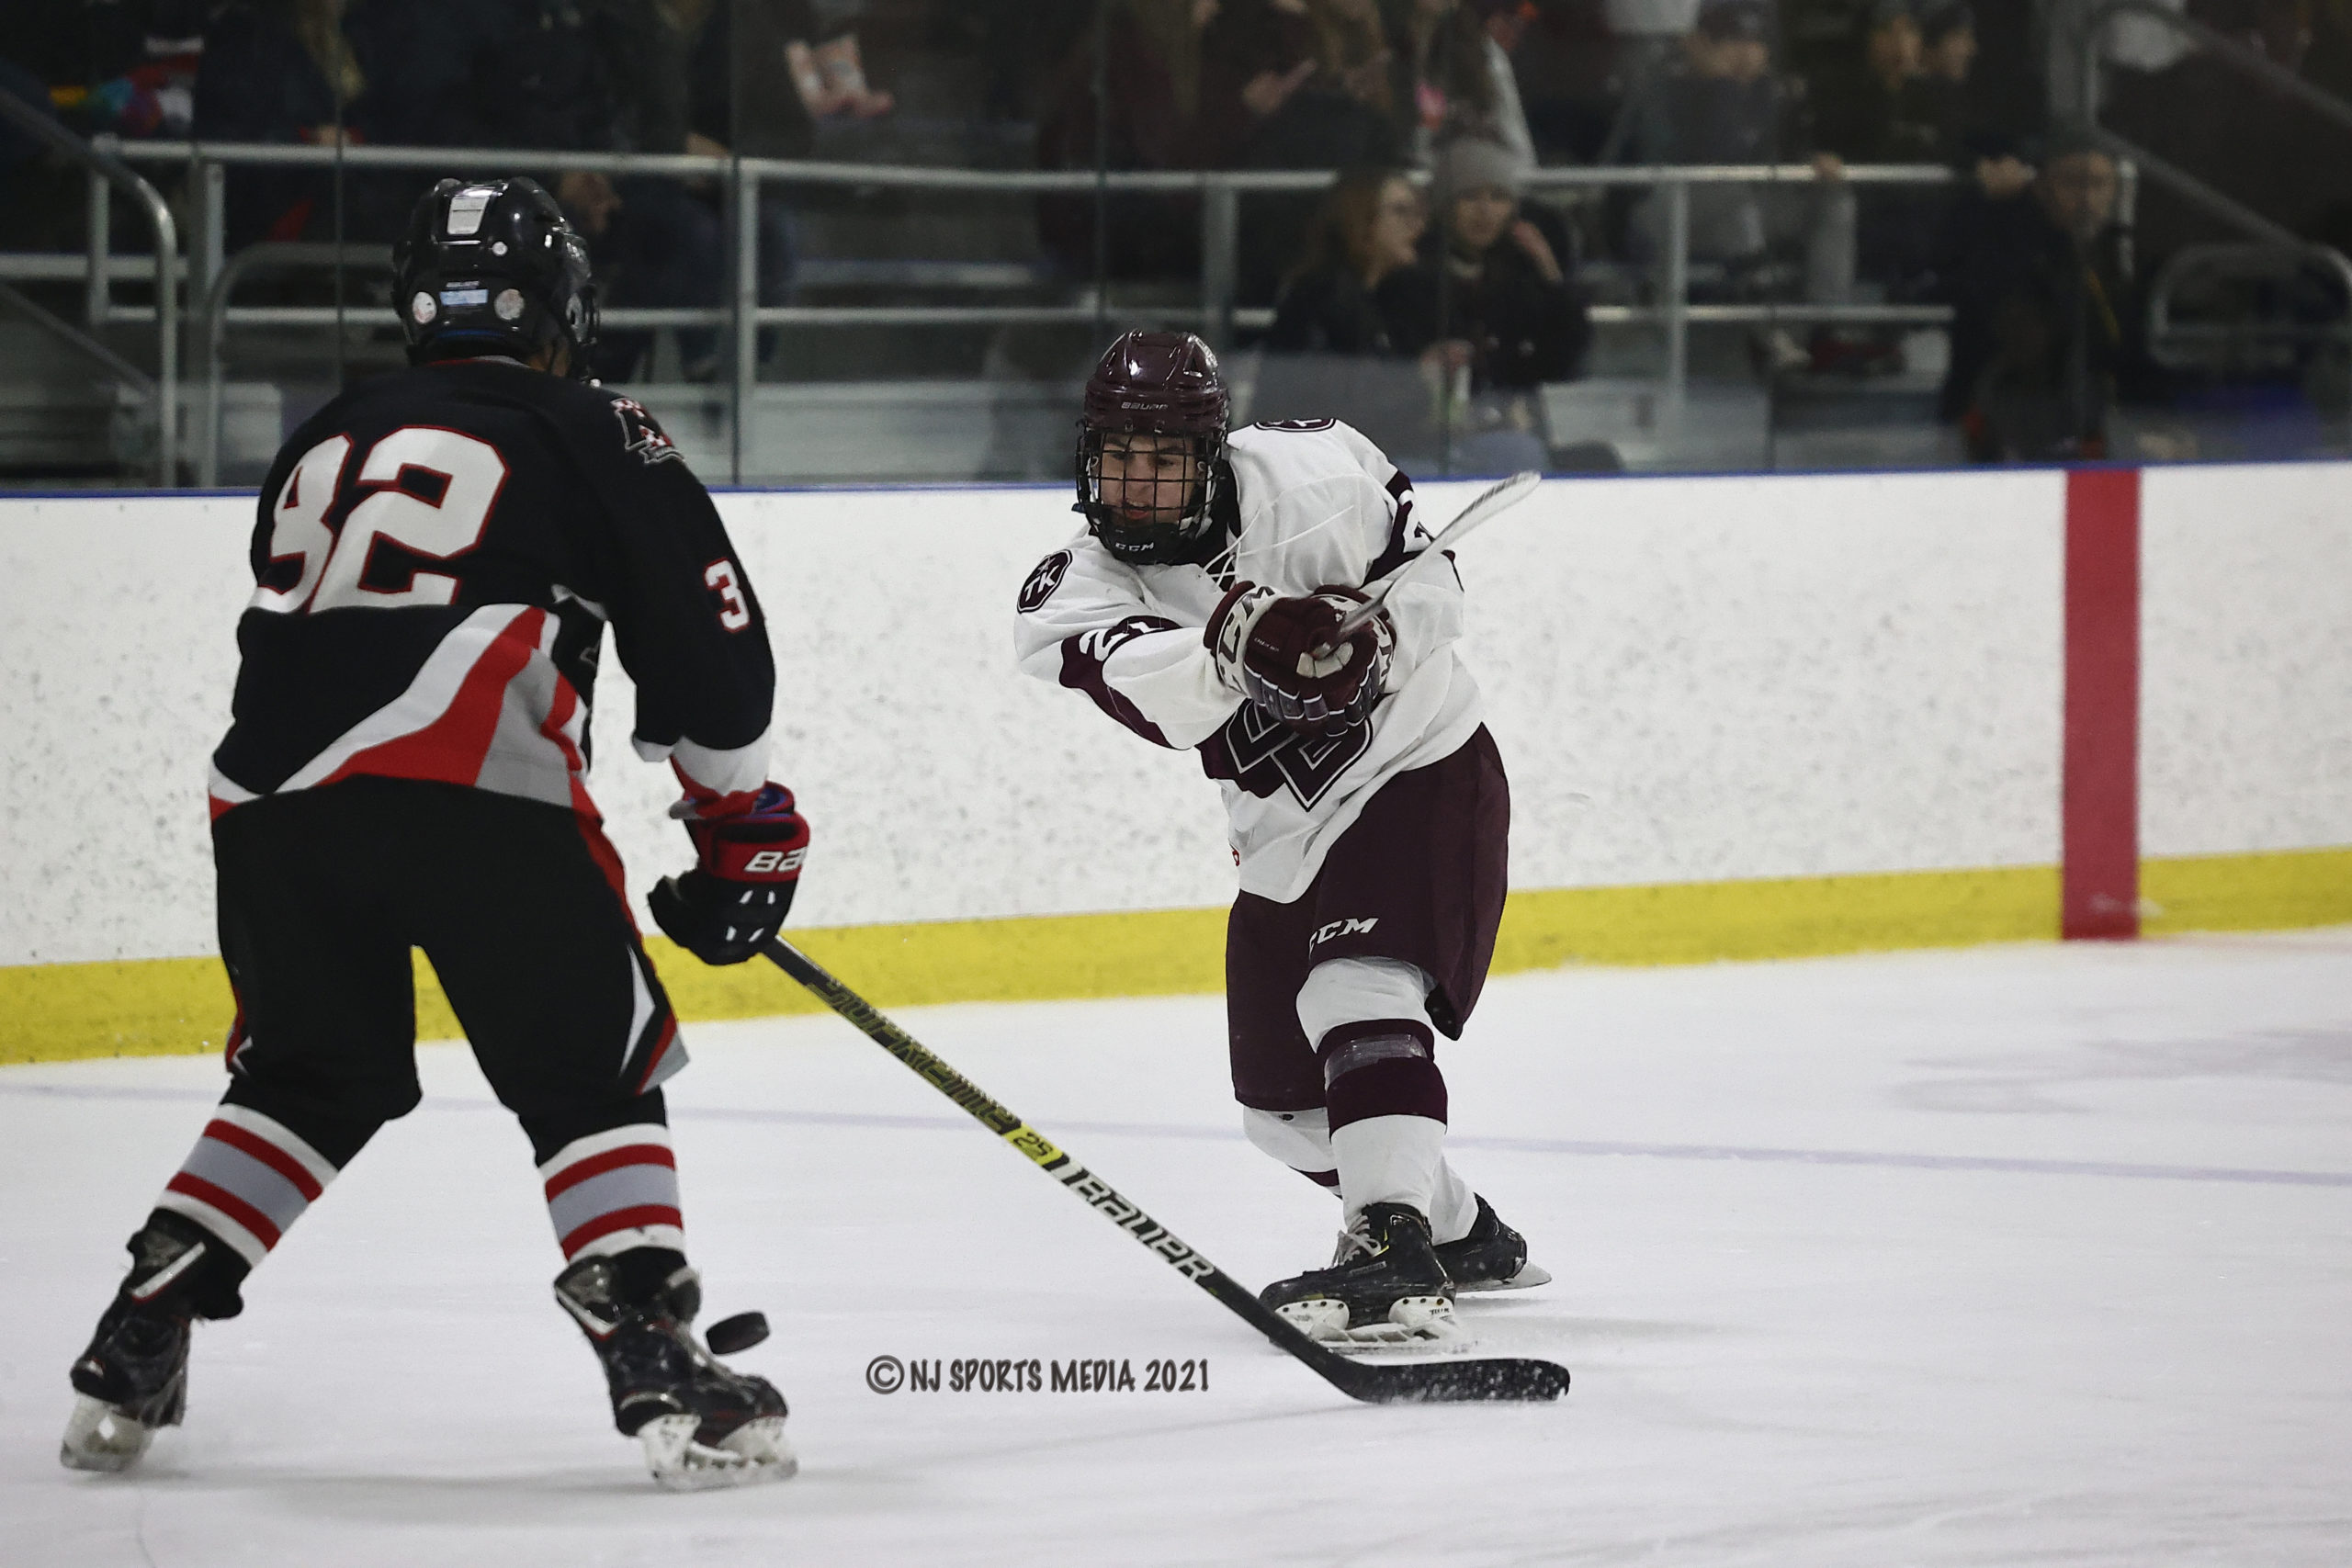 Watch LIVE: St. Augustine to face state-best Delbarton in ice hockey